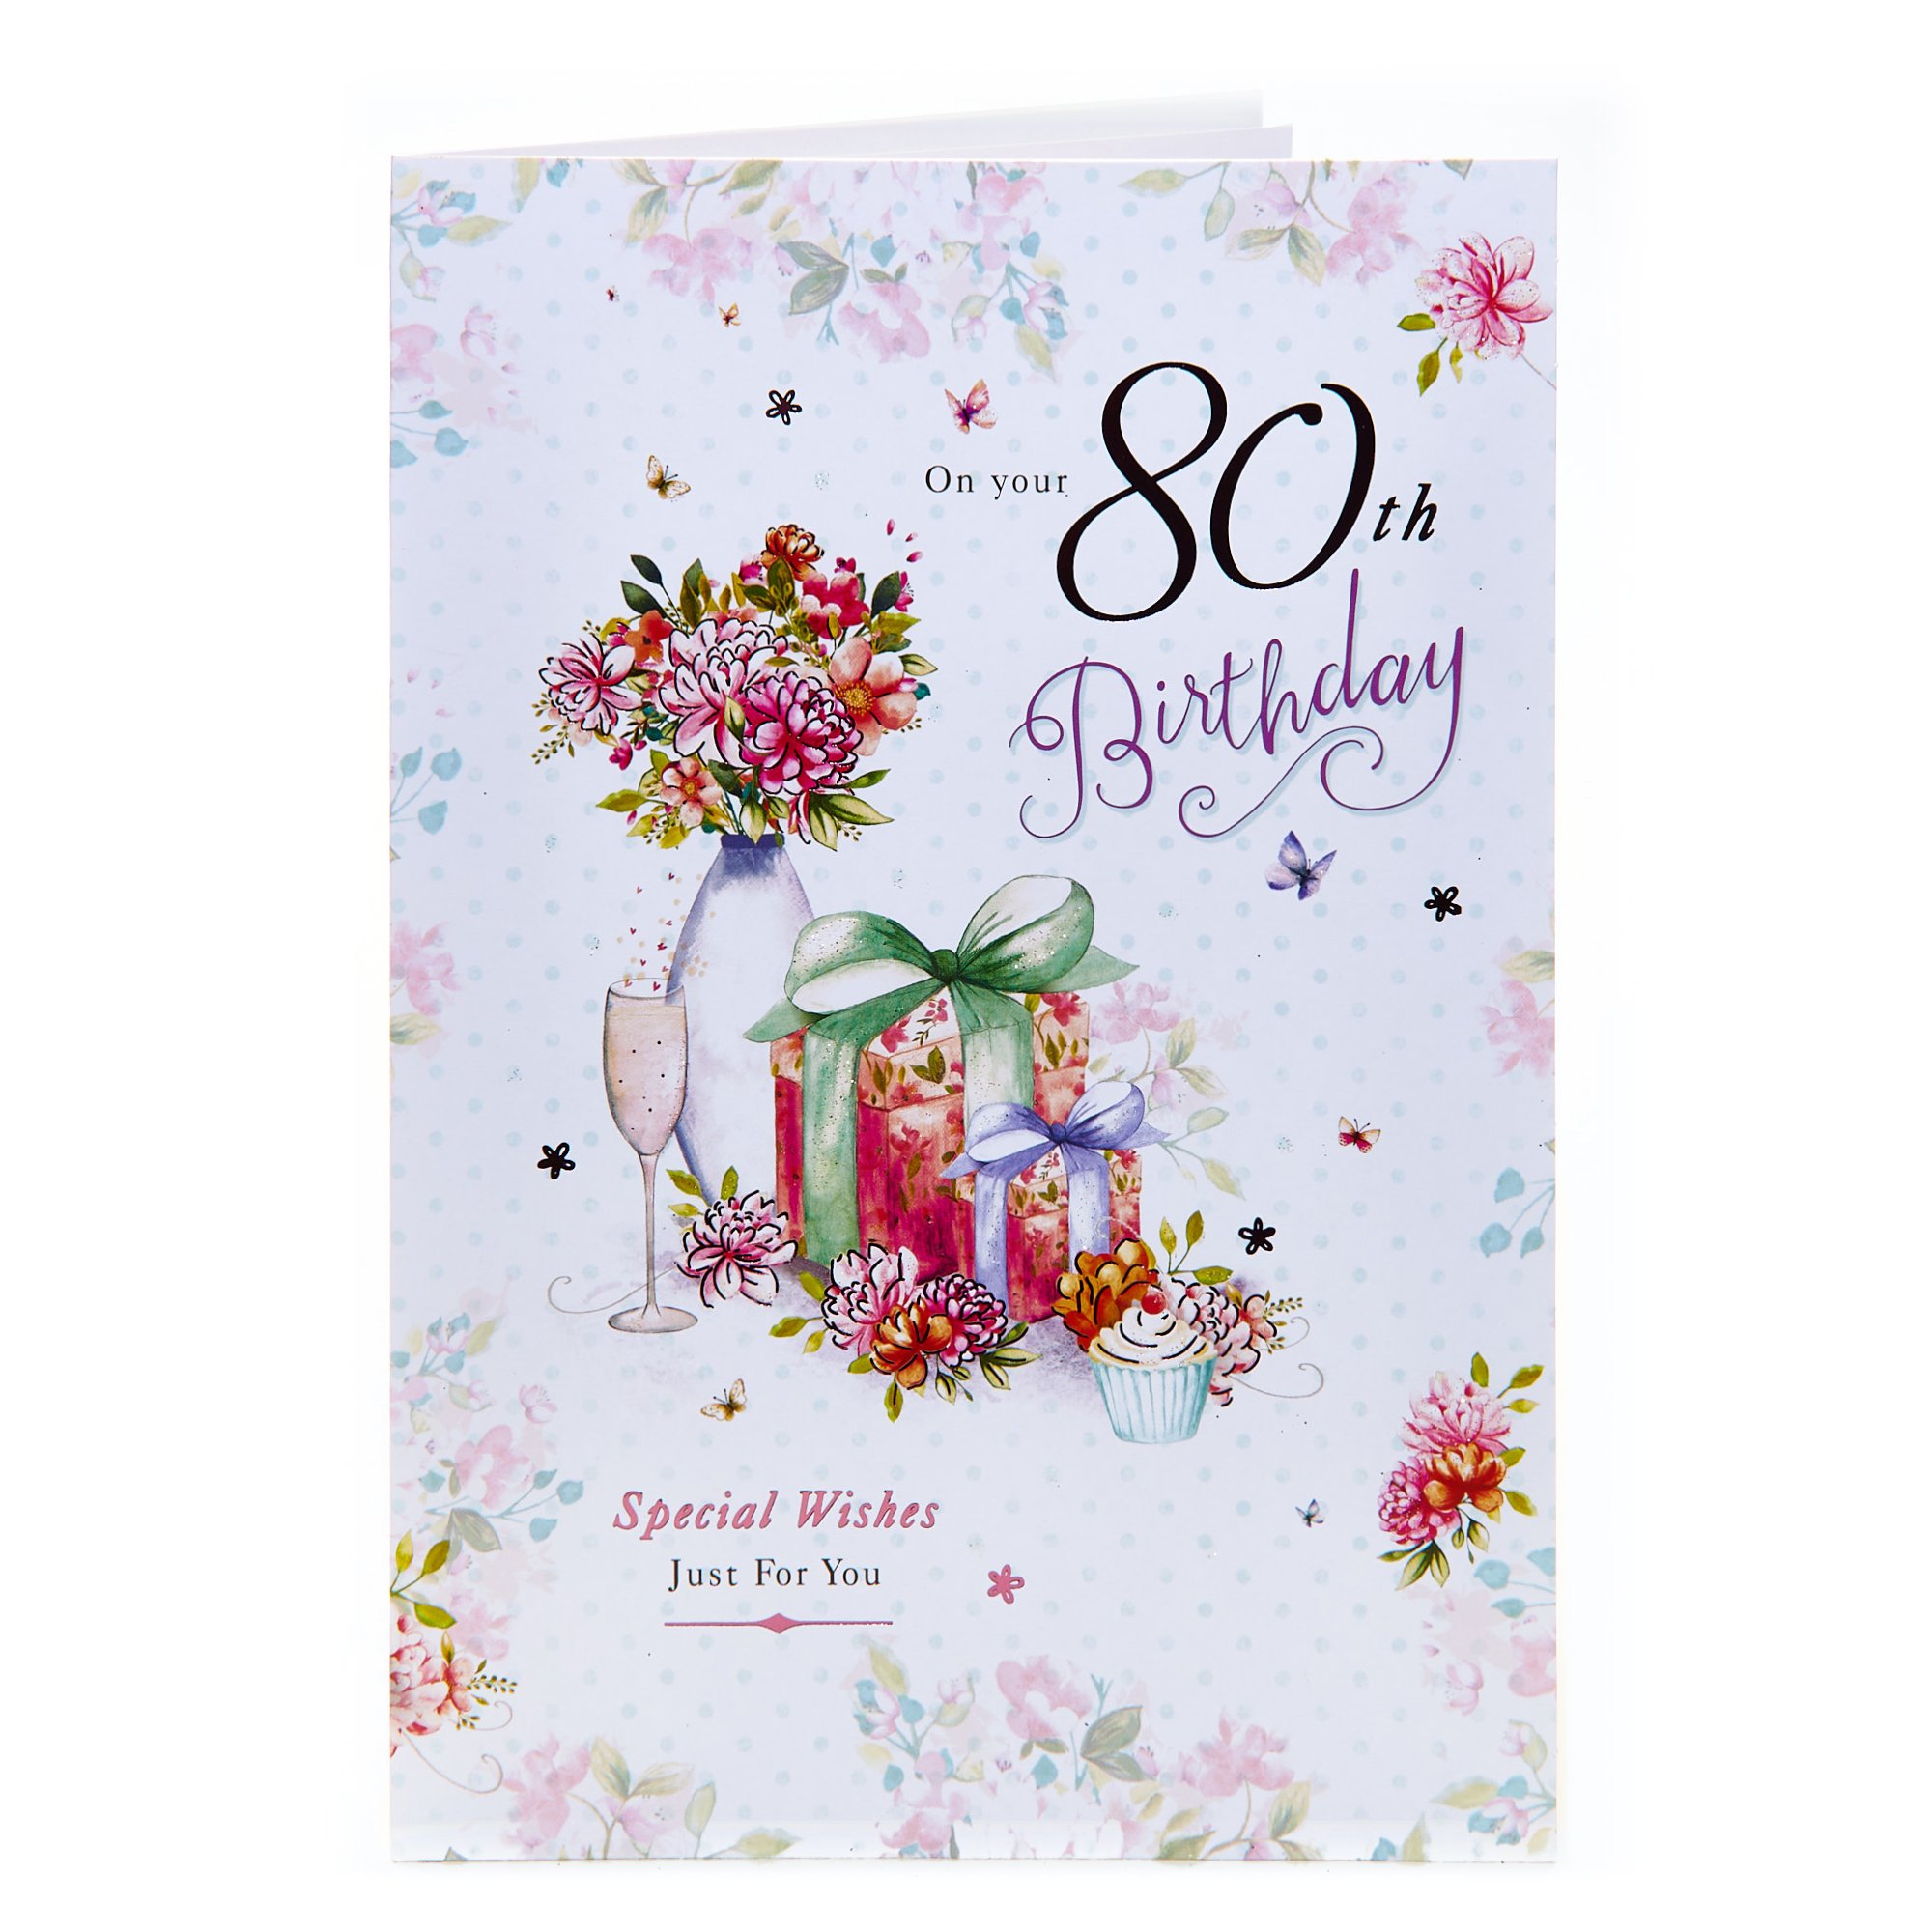 80th Birthday Card - Special Wishes Just For You